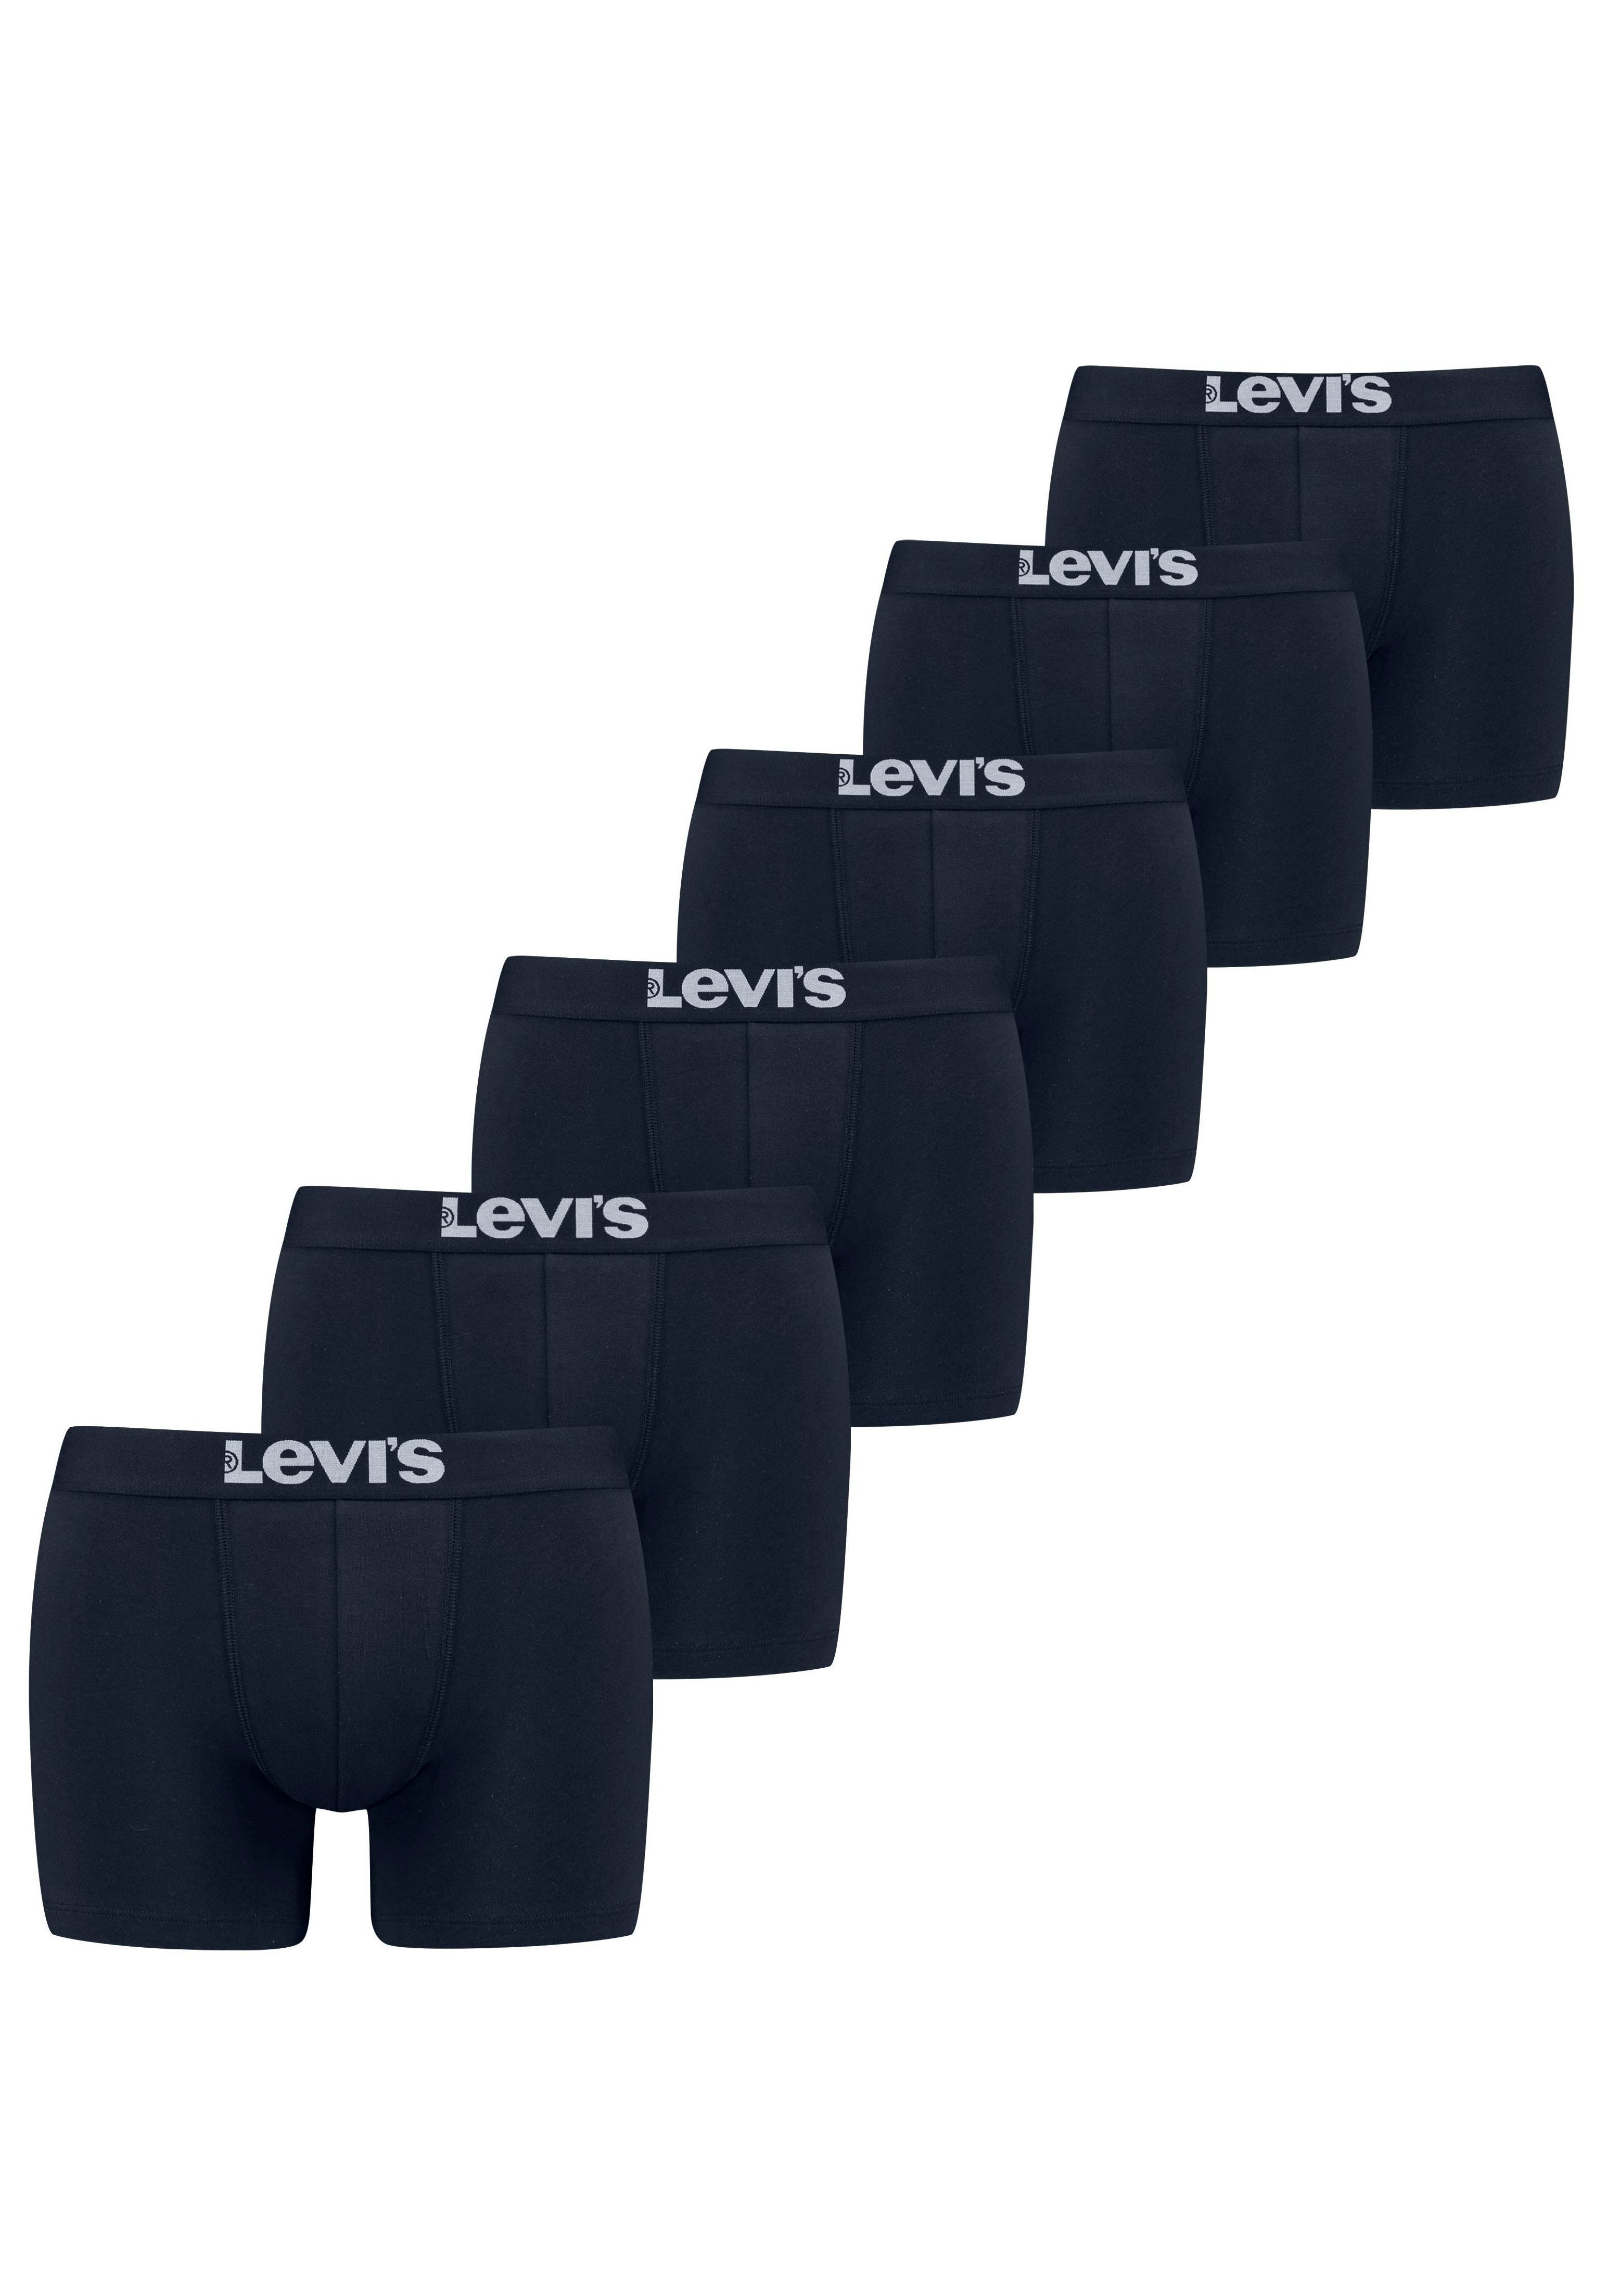 ORG CO Boxershorts BRIEF (Packung, BOXER 6-St) Levi's® ECOM MEN BASIC SOLID navy 6P LEVIS